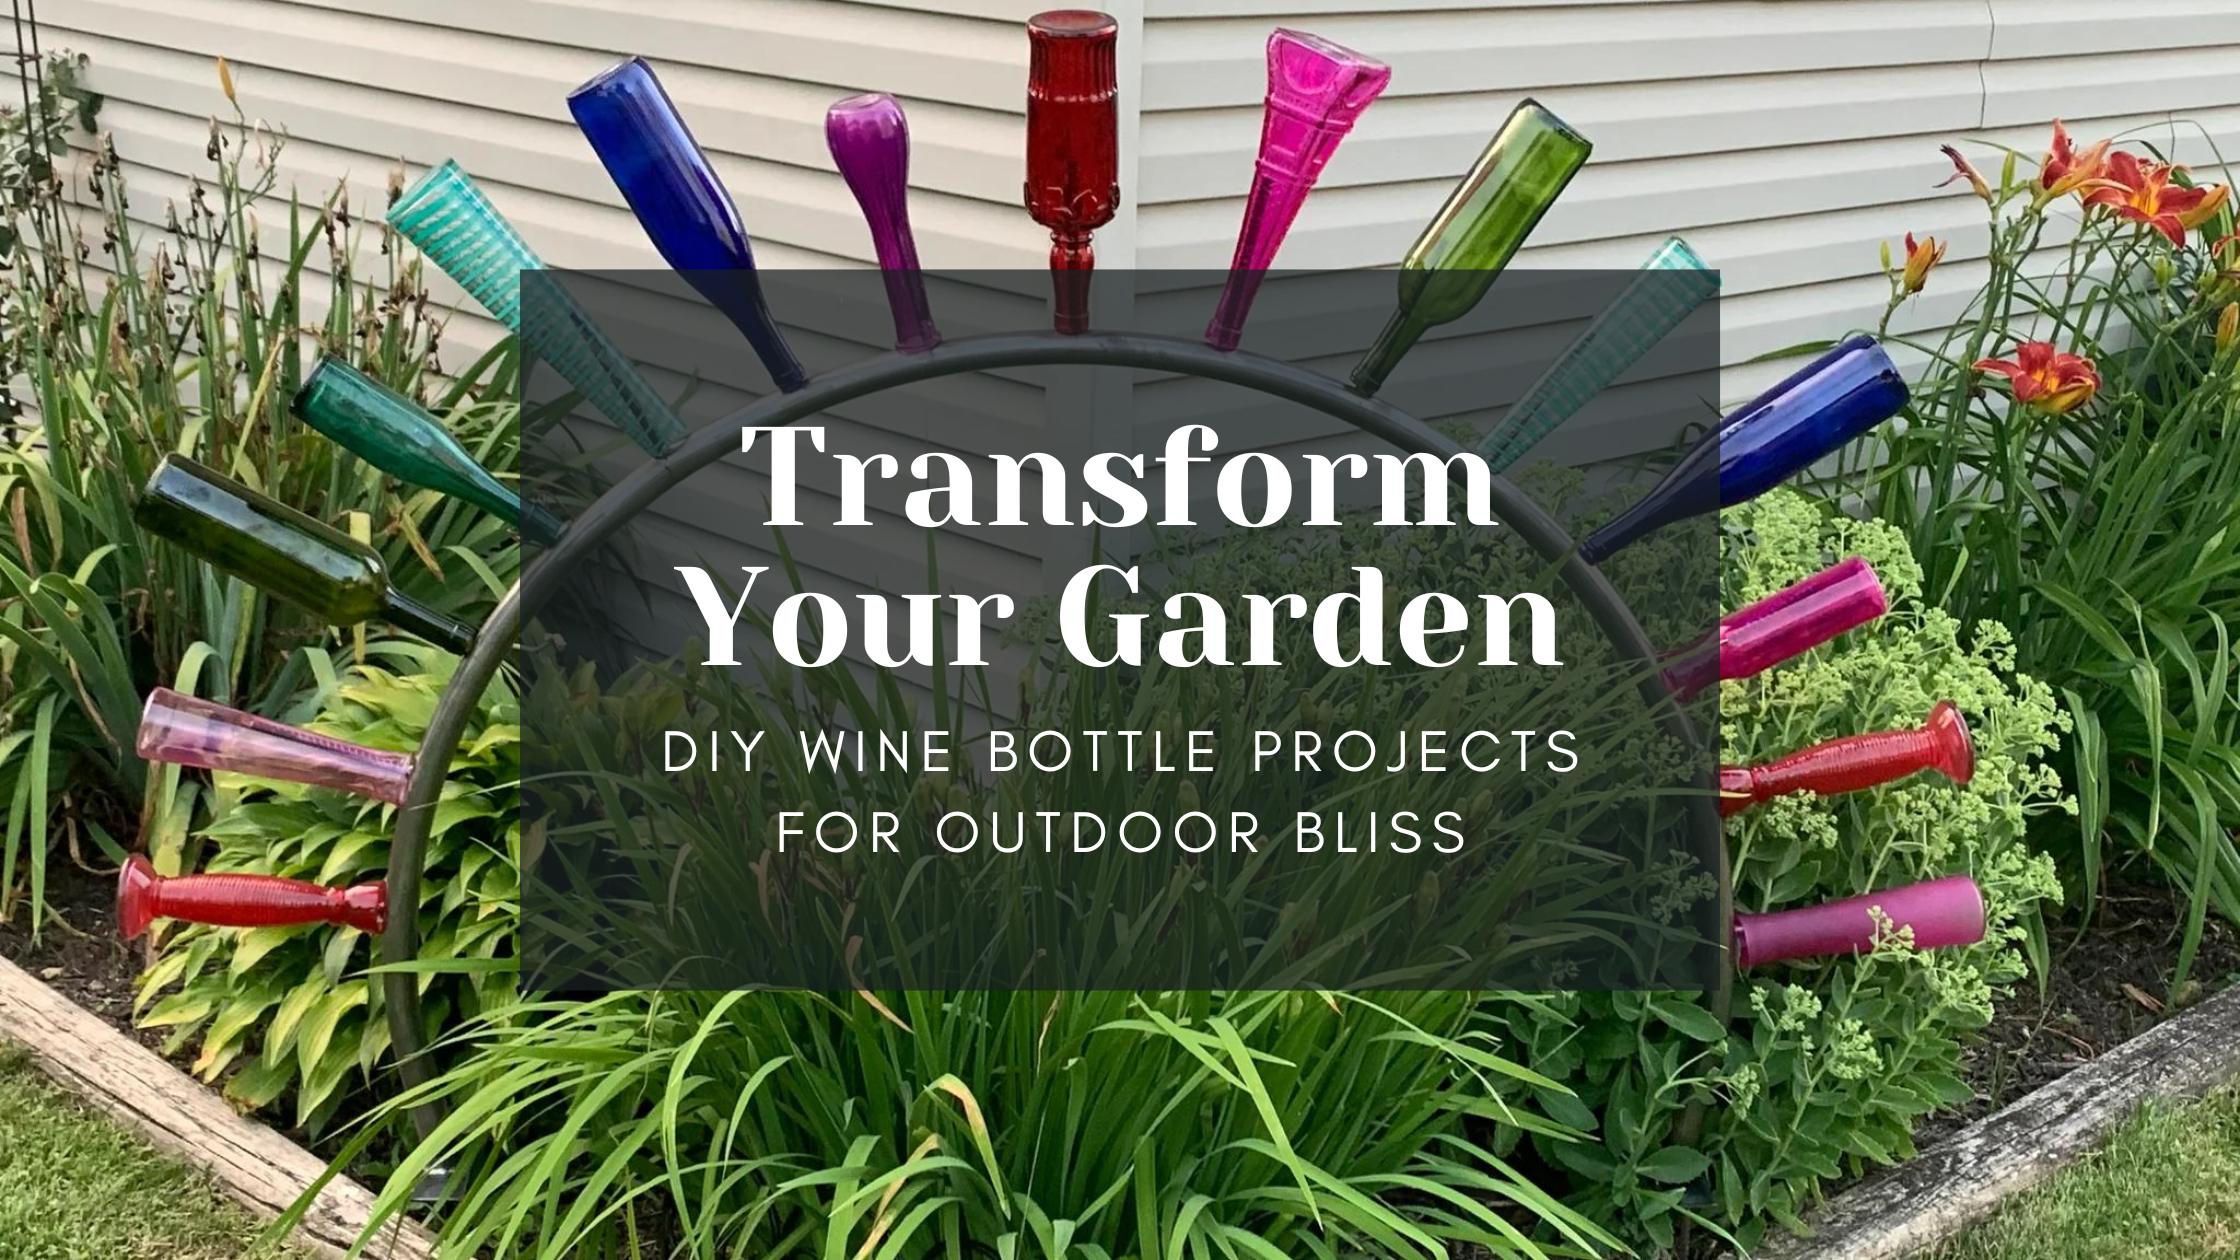 Transform Your Garden: DIY Wine Bottle Projects for Outdoor Bliss